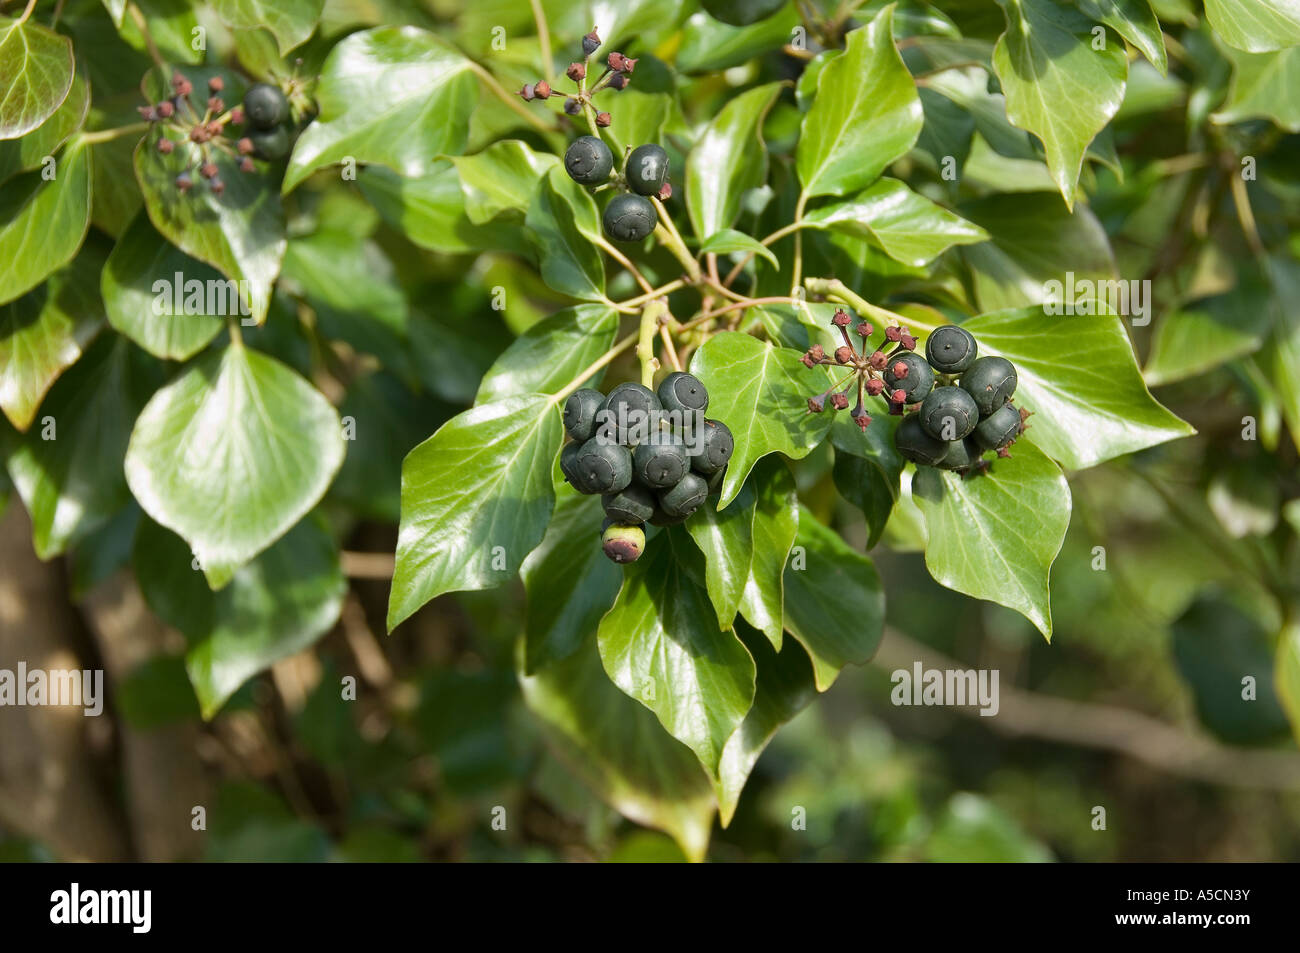 Close up of black berry berries on ivy plant in autumn England UK United Kingdom GB Great Britain Stock Photo